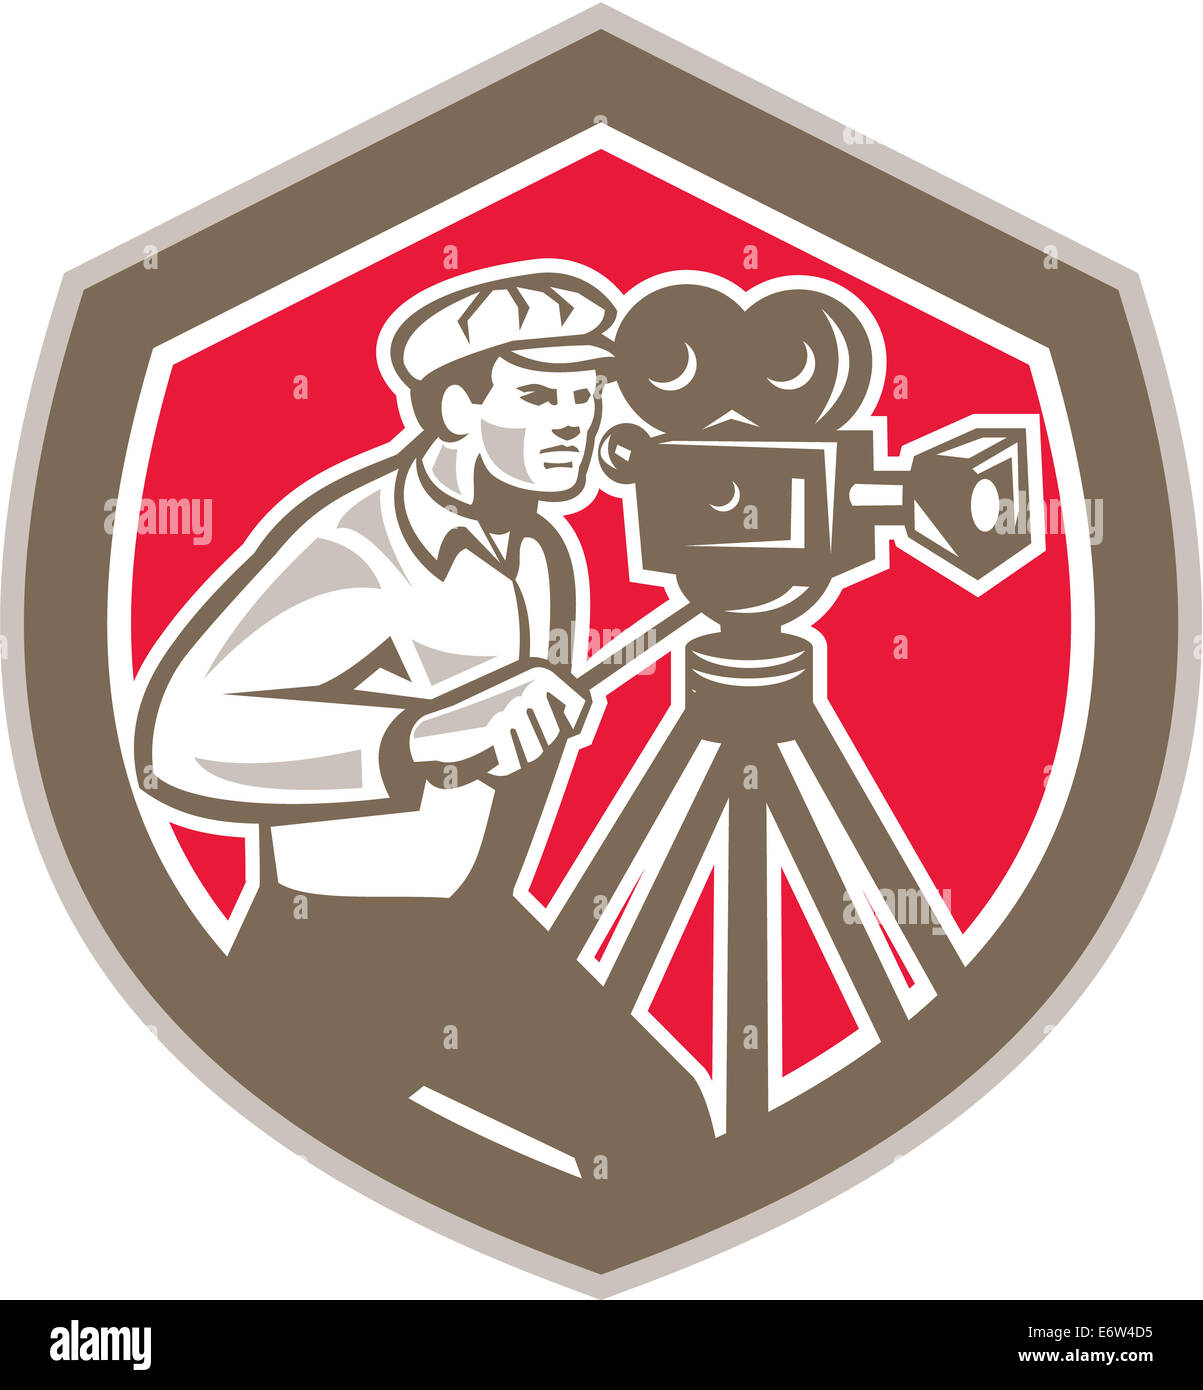 Illustration of a cameraman movie director with vintage movie film camera shooting set inside shield crest on isolated background done in retro style. Stock Photo